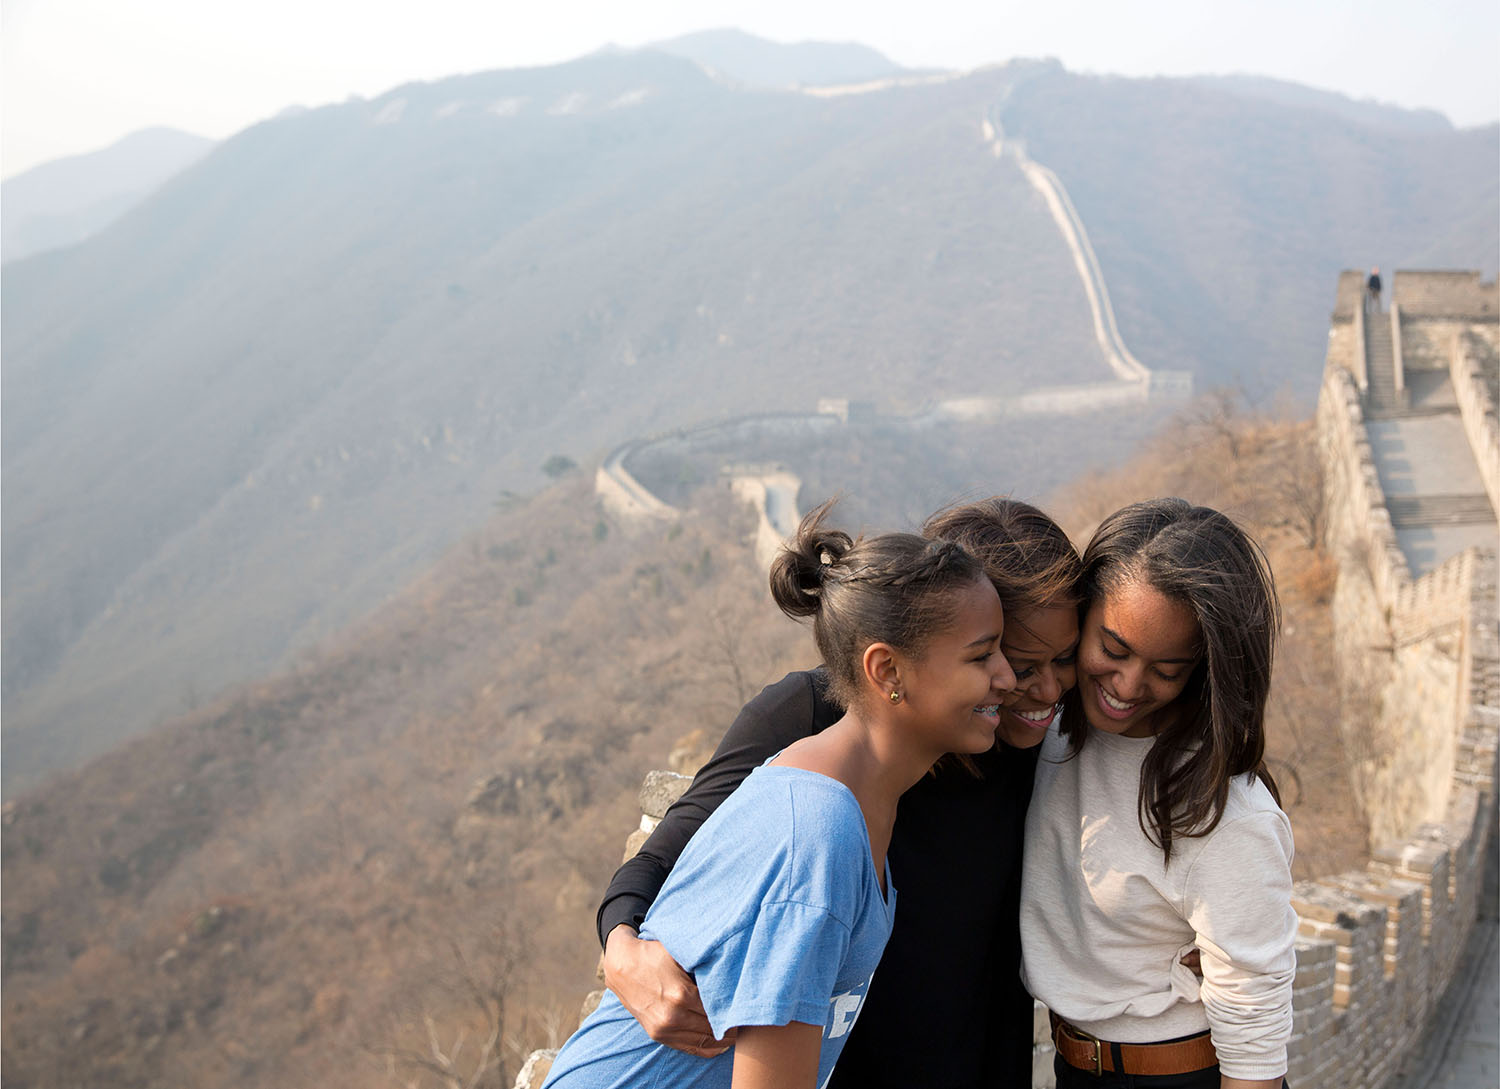 First Lady Michelle Obama hugs daughters Sasha, left, and Malia as they visit the Great Wall of China in Mutianyu, China, March 23, 2014. (Official White House Photo by Amanda Lucidon)

This official White House photograph is being made available only for publication by news organizations and/or for personal use printing by the subject(s) of the photograph. The photograph may not be manipulated in any way and may not be used in commercial or political materials, advertisements, emails, products, promotions that in any way suggests approval or endorsement of the President, the First Family, or the White House.